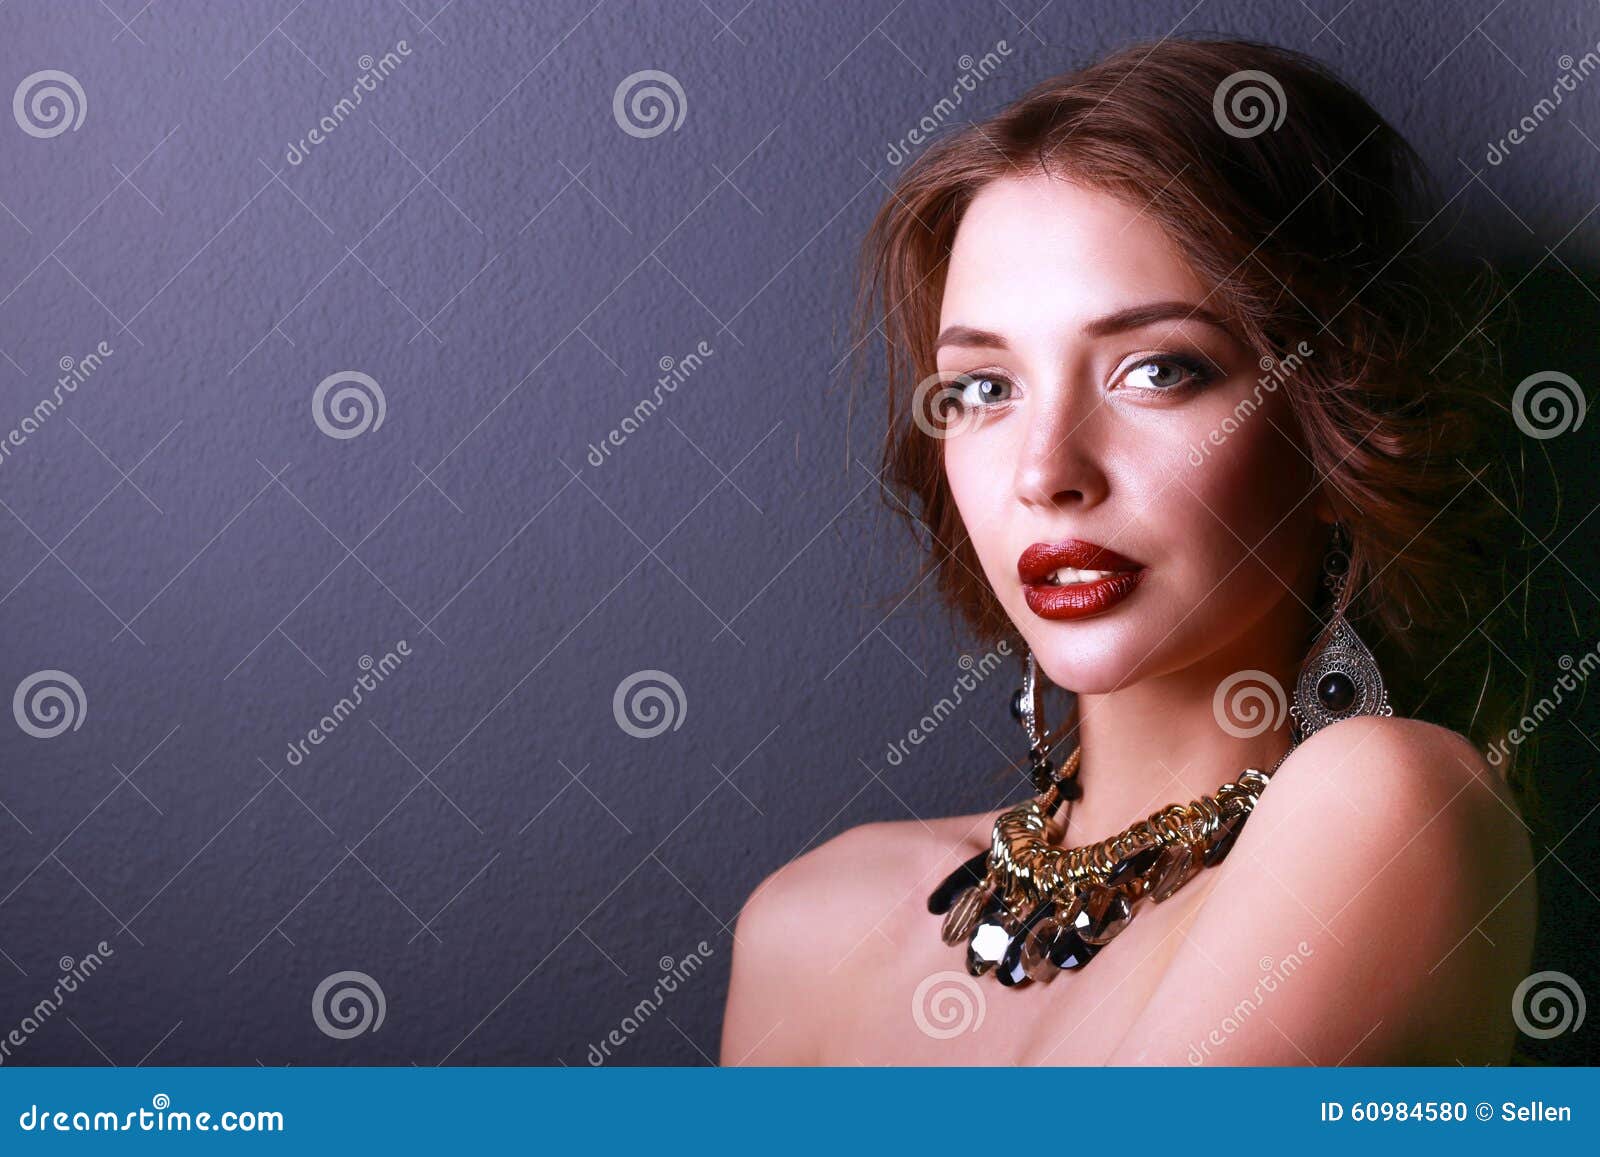 Portrait of young beautiful woman with jewelry .